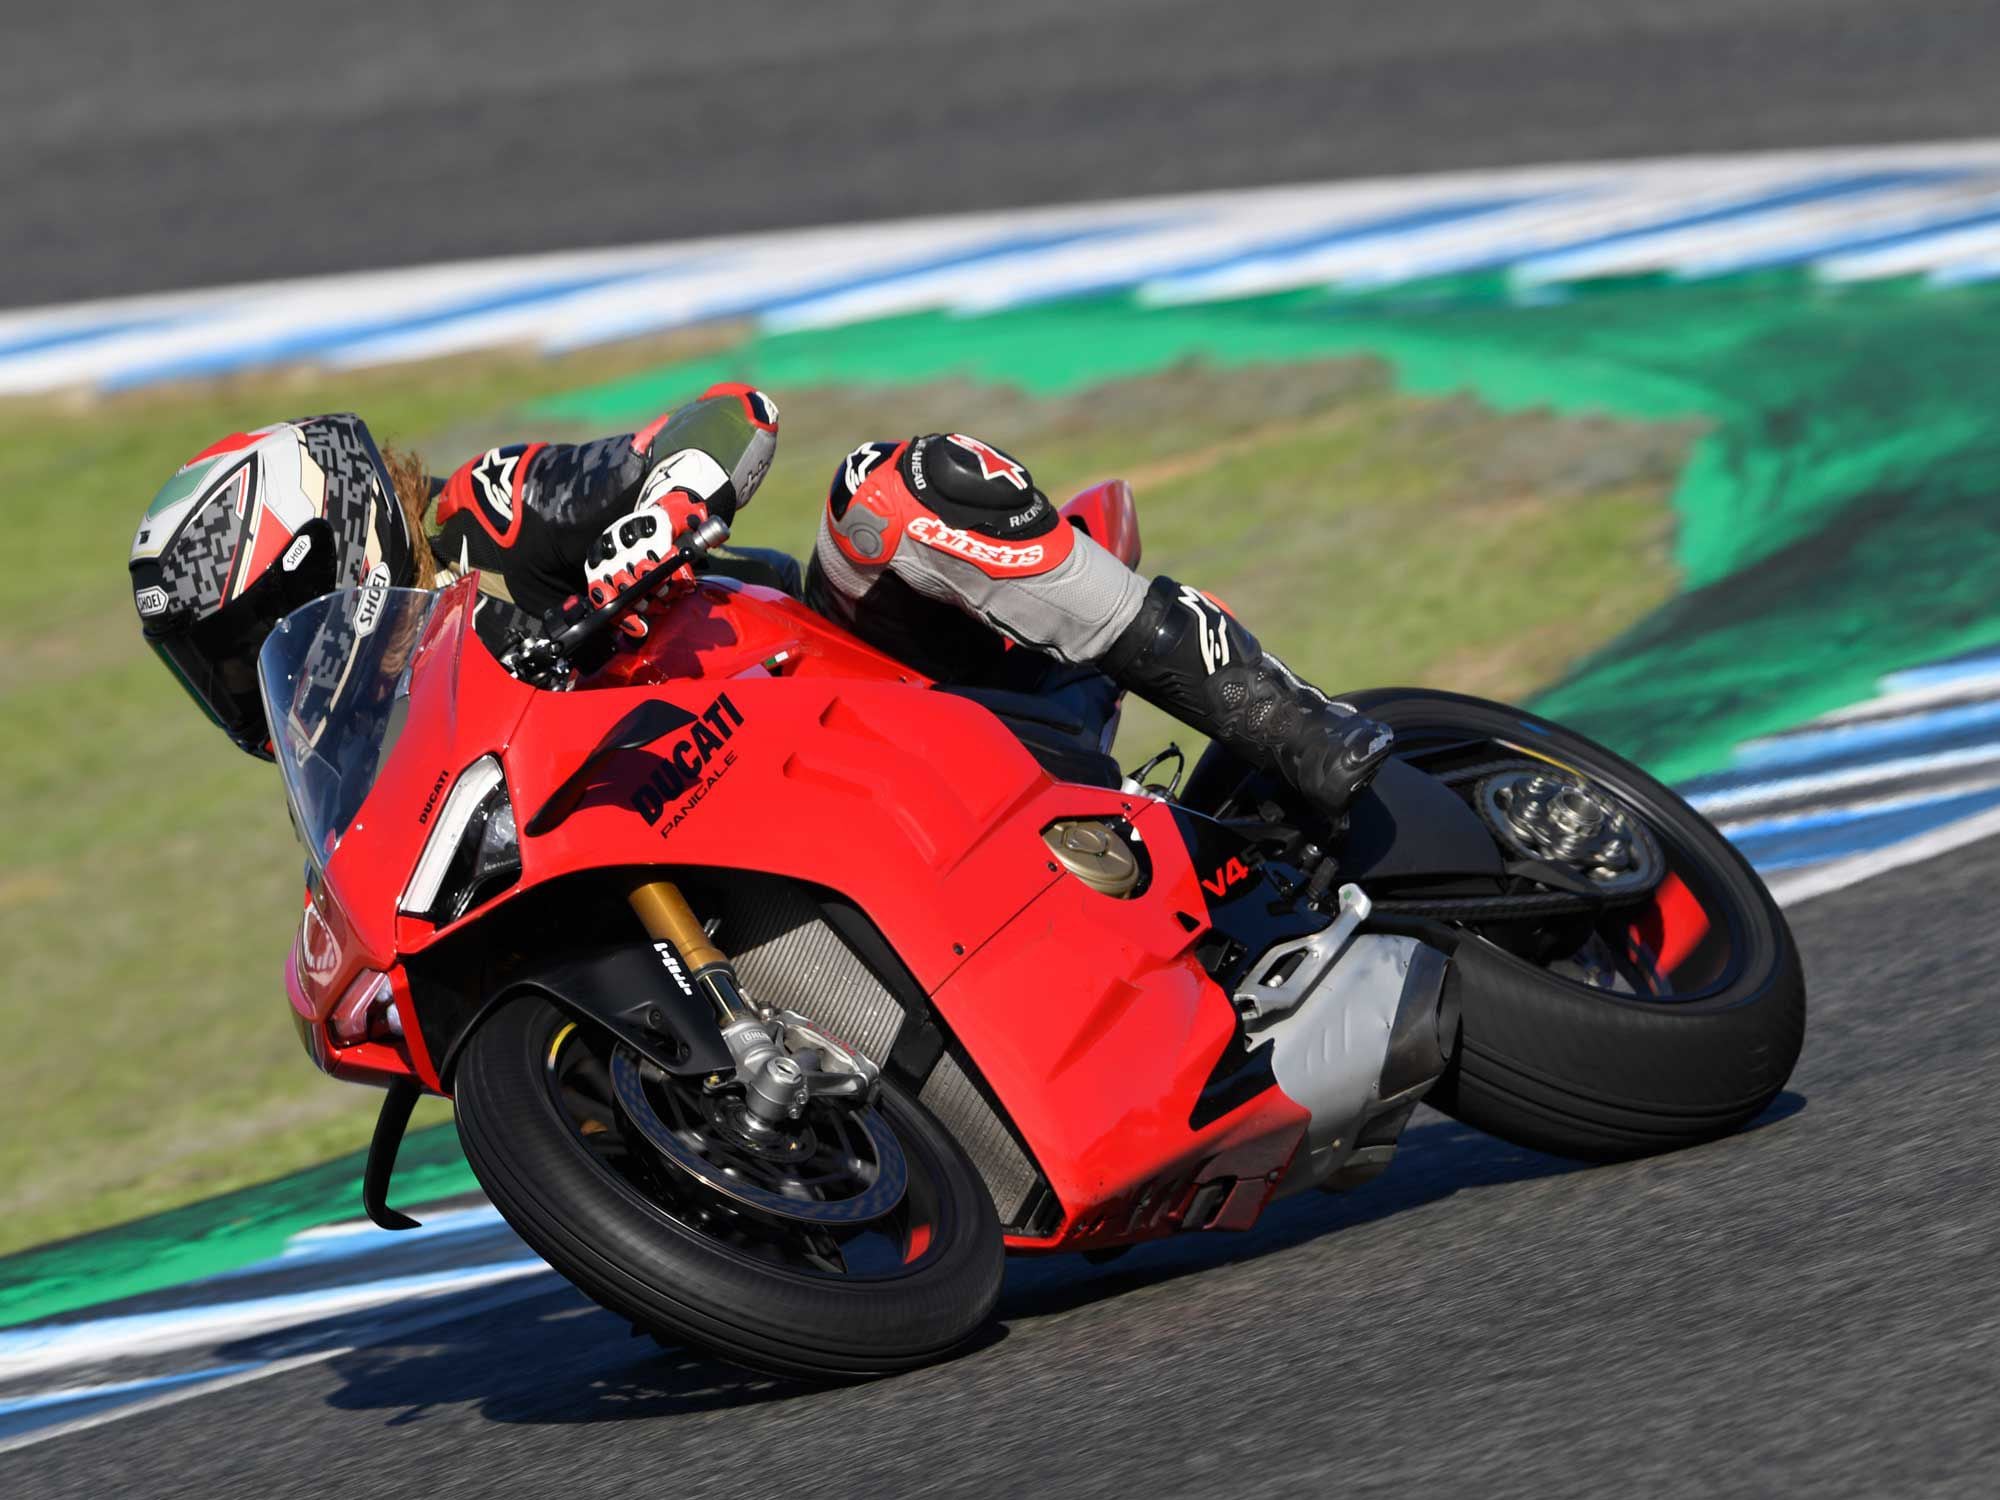 Even though it weighs more than the outgoing L-Twin-powered Panigale 1299, we’re mesmerized by how agile the Panigale V4 S is in motion.